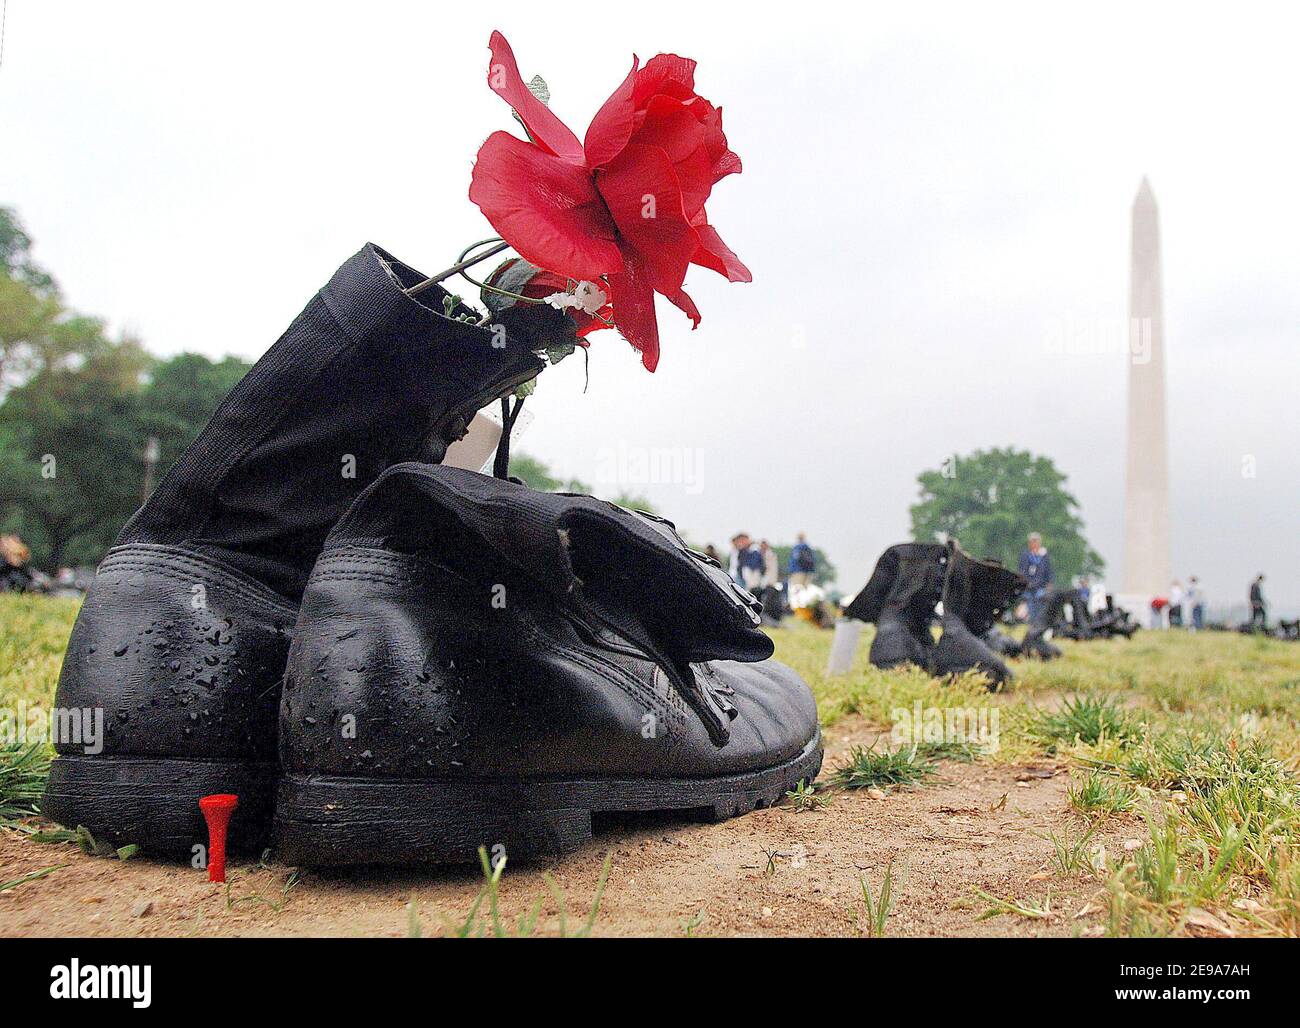 The 'Human Costs of War' exhibit, a pair of combat boots for every U.S. military casualty in Iraq is in display at the National Mall in Washington DC, USA on May 11, 2006. Photo by Olivier Douliery/ABACAPRESS.COM Stock Photo